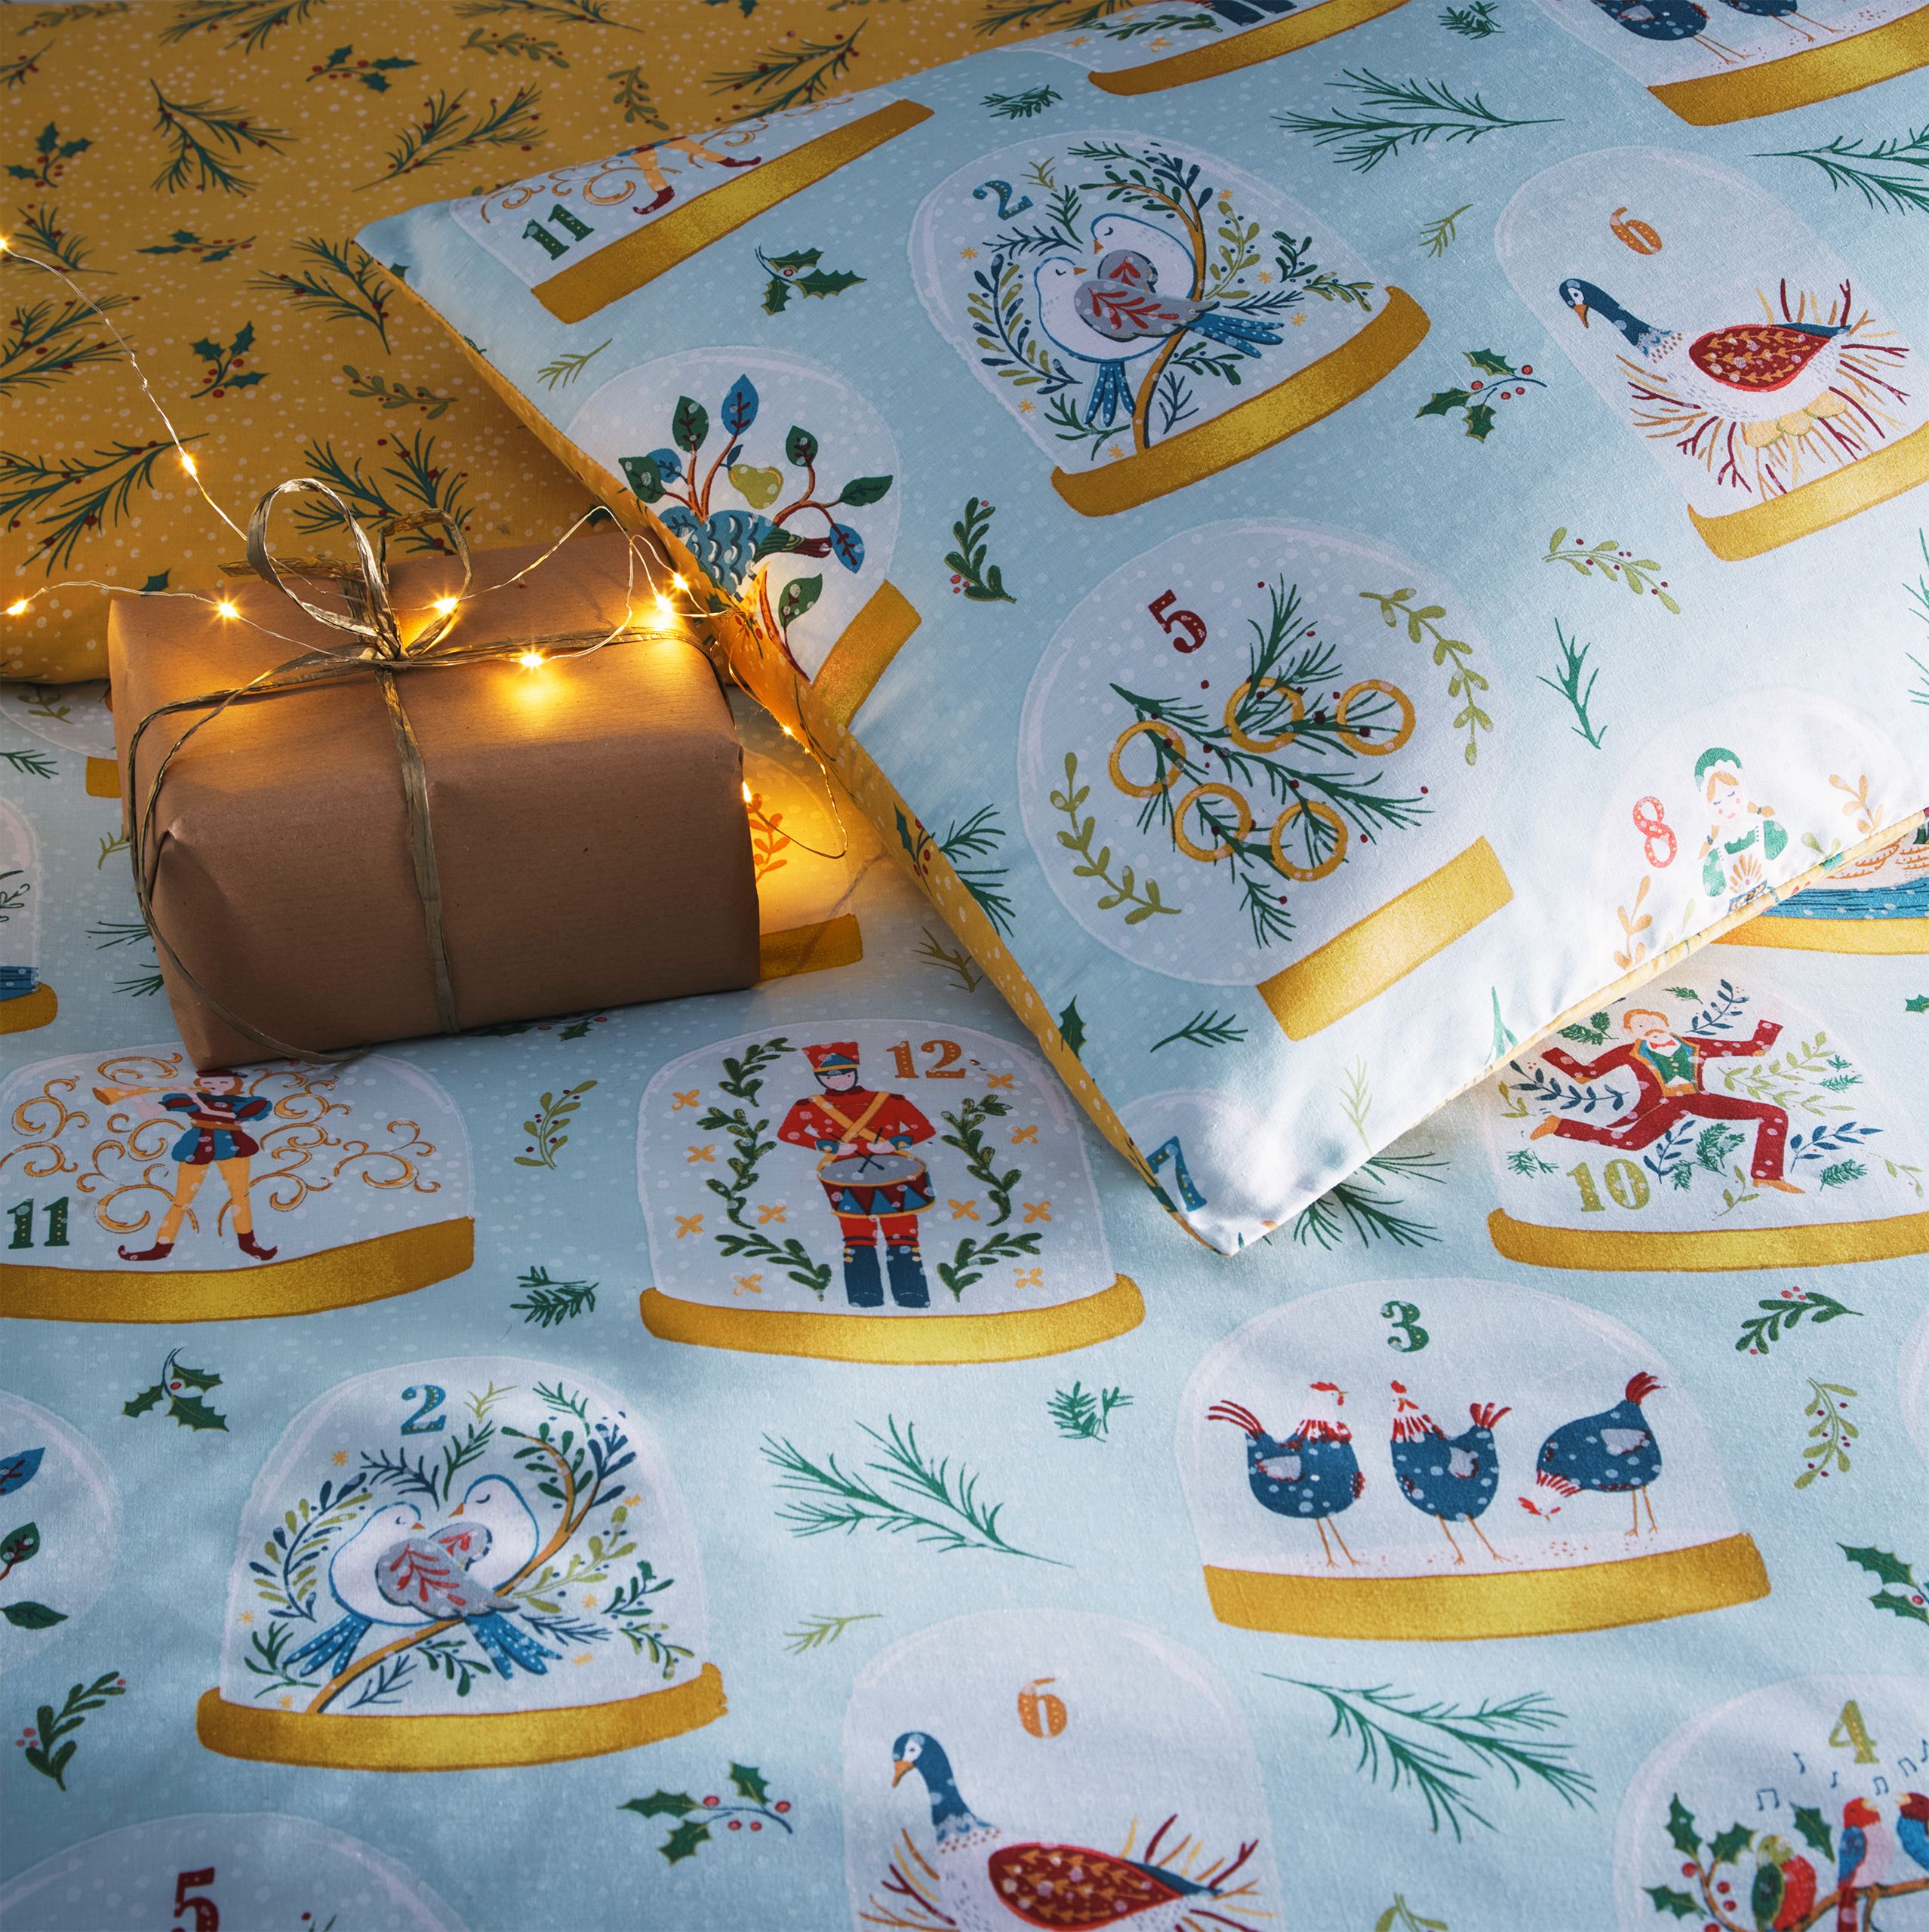 In celebration of the traditional Christmas song, our 12 days of Christmas bedding is a festive feast for the eyes, depicting each of the gifts within a ornate snow globe, for a magical touch. The reverse design features festive sprays of pine and holly, and a dusting of snow.